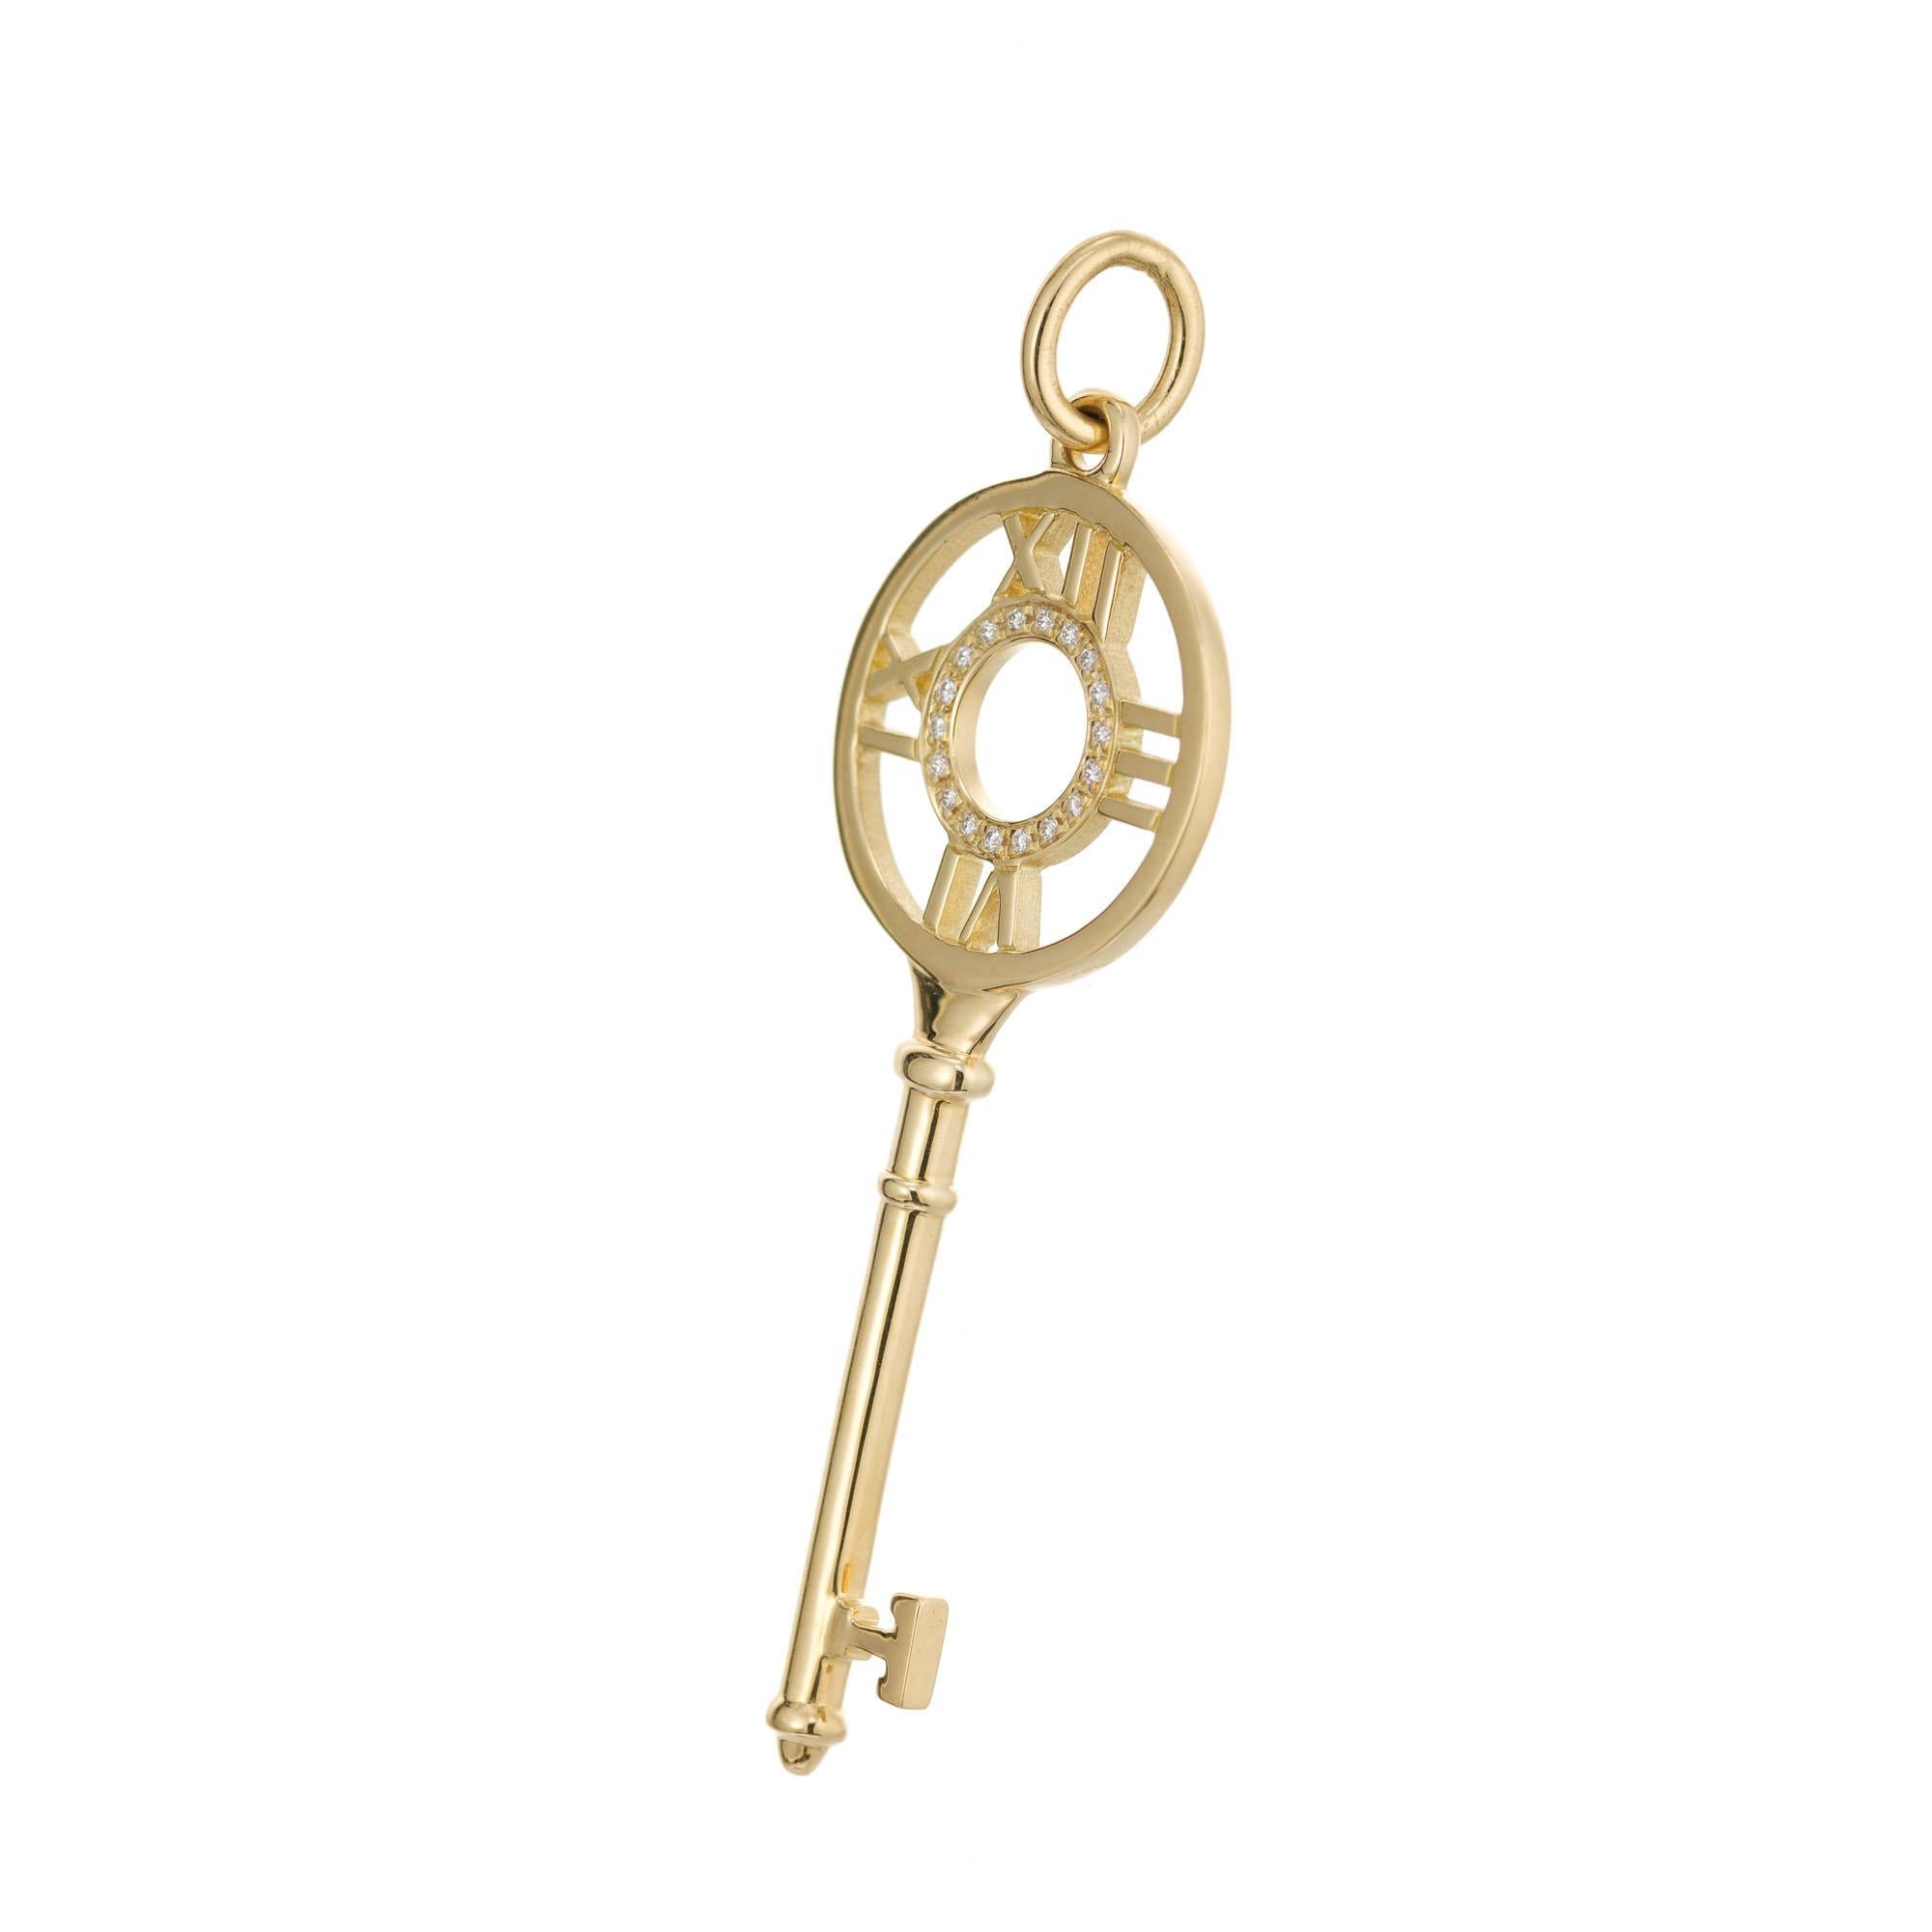 Atlas diamond key from Tiffany & Co in solid 18k yellow gold. 18 full cut diamonds .7cts

18 full cut diamonds, H VS approx. .7cts
18k yellow gold
Stamped: 750
Hallmark: Tiffany & Co Atlas 
4.0 grams
Top to bottom: 1.75 Inches
Width: 5/8 Inch
